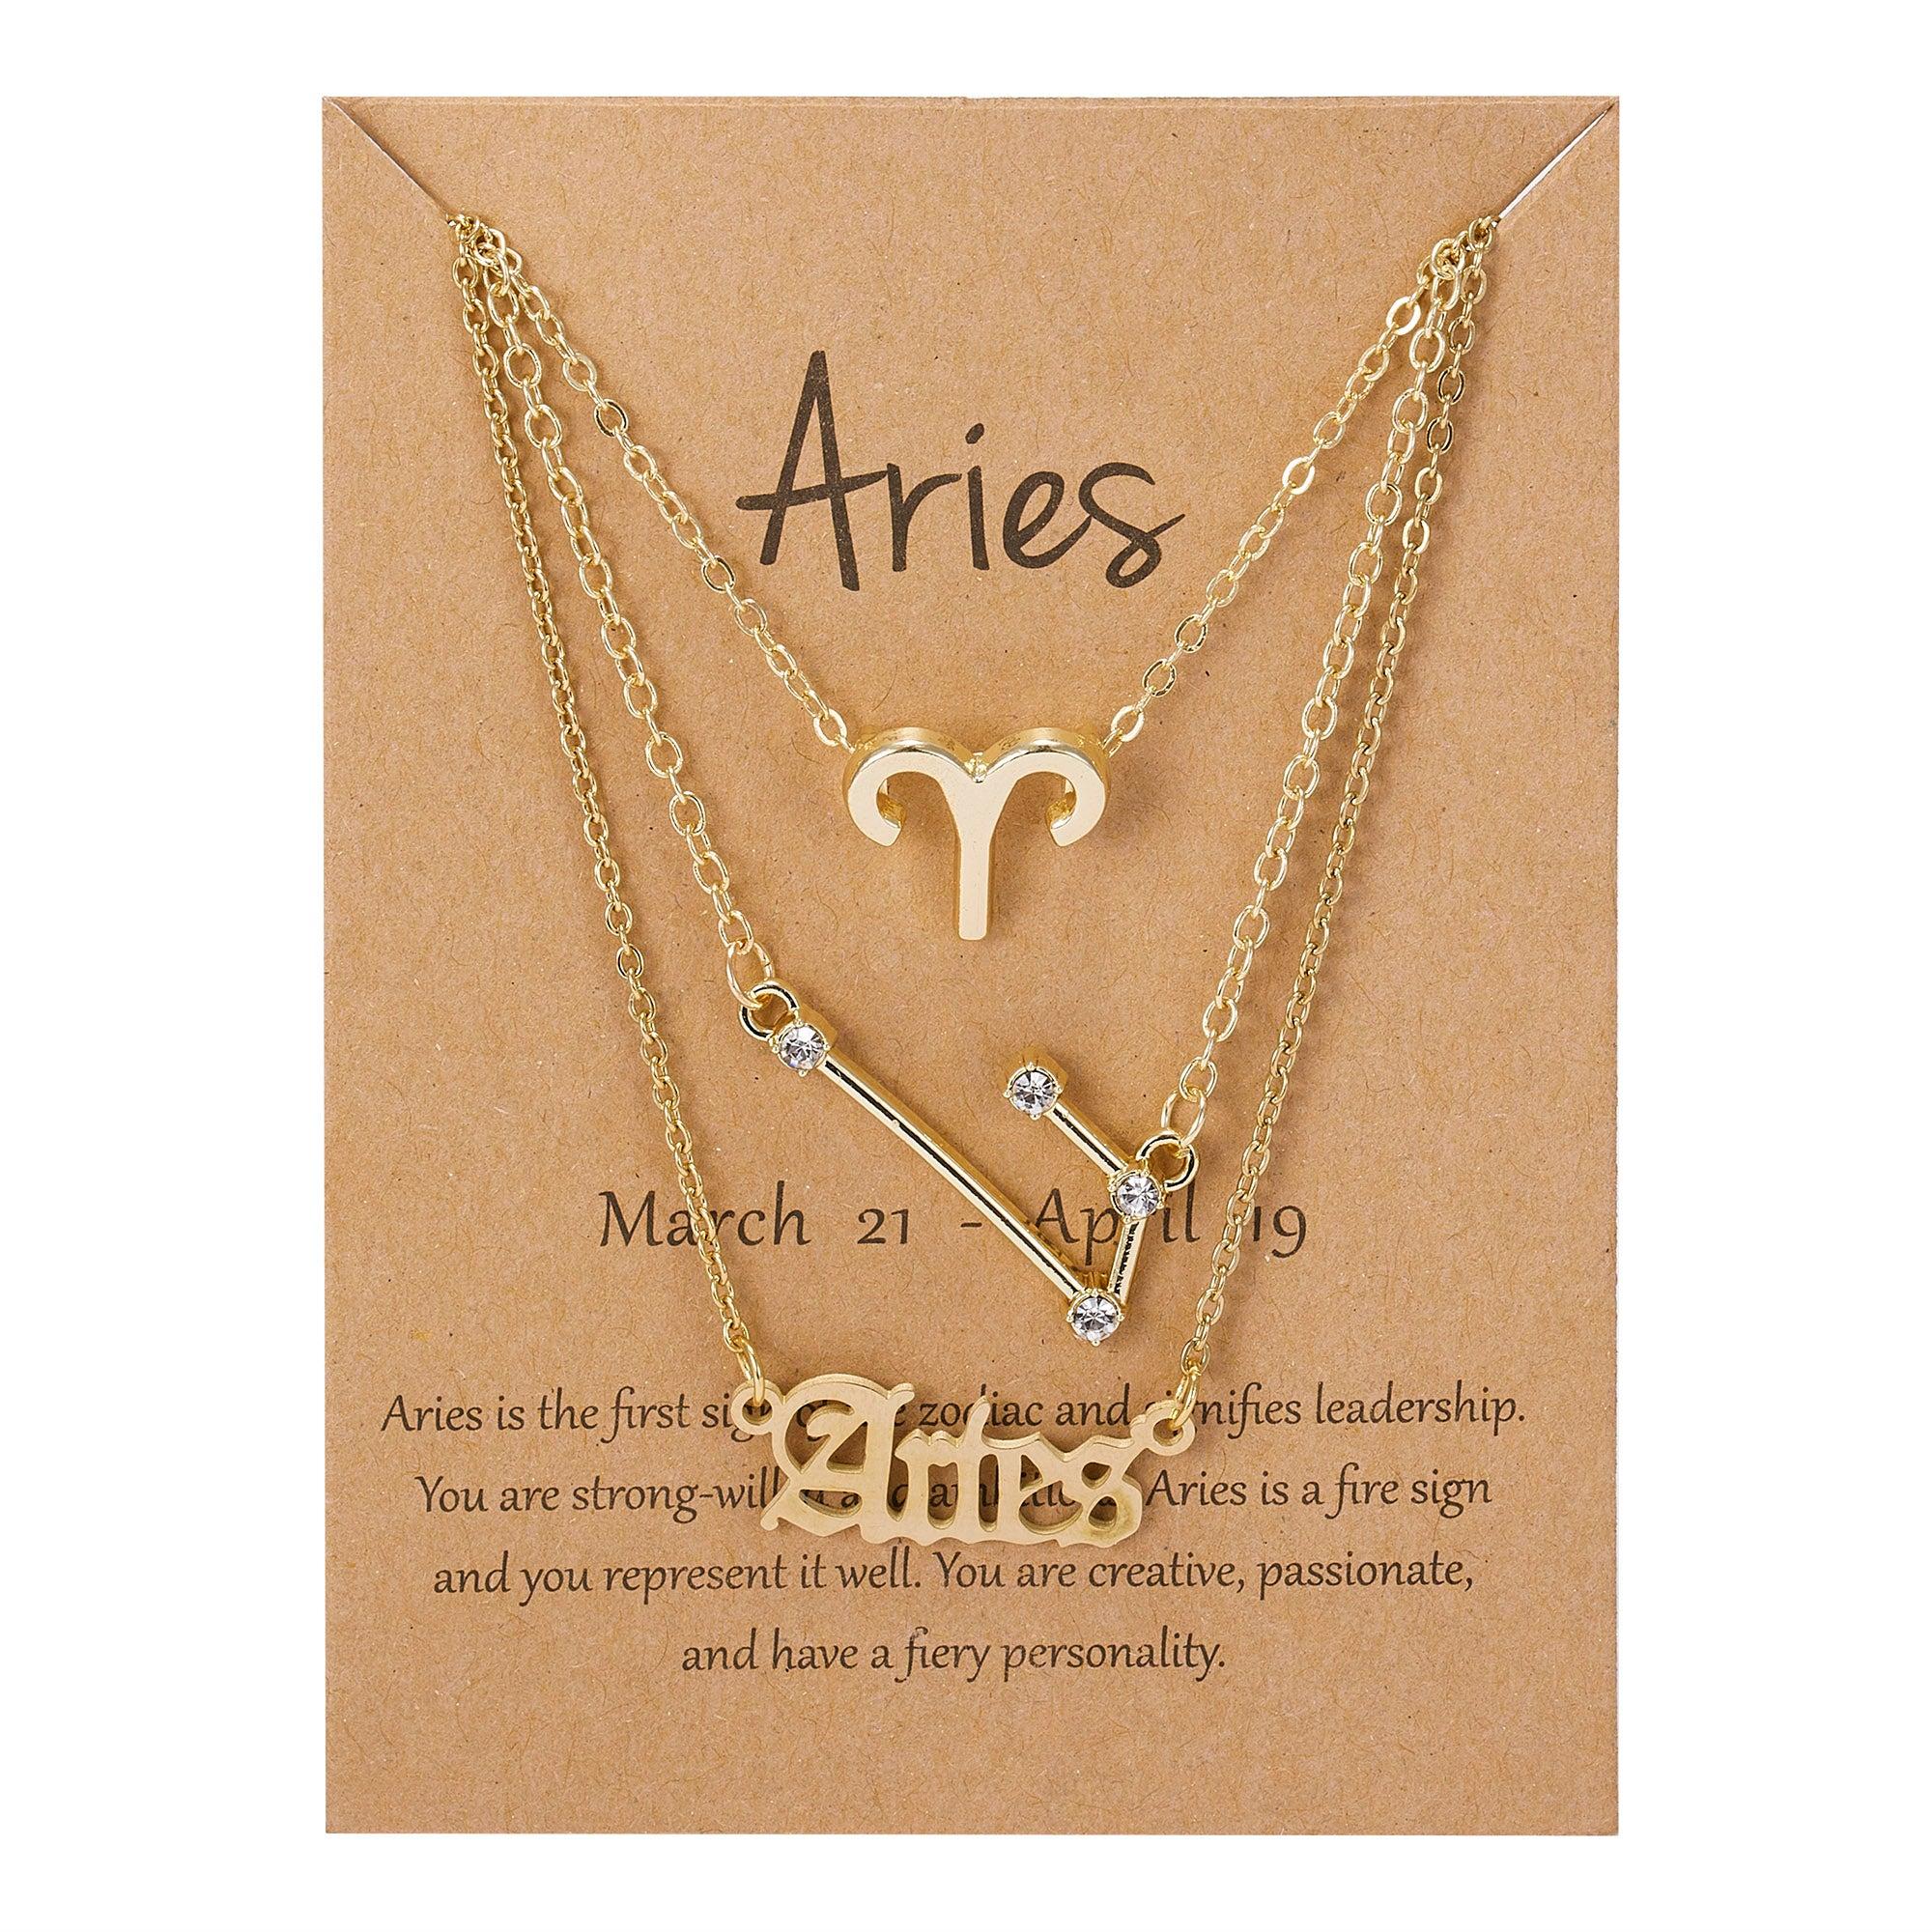 3Pcs/Set Cardboard Star Zodiac Sign Pendant Gold Color 12 Constellation Necklace Aries Cancer Leo Scorpio Necklace Jewelry Gifts - Image #8